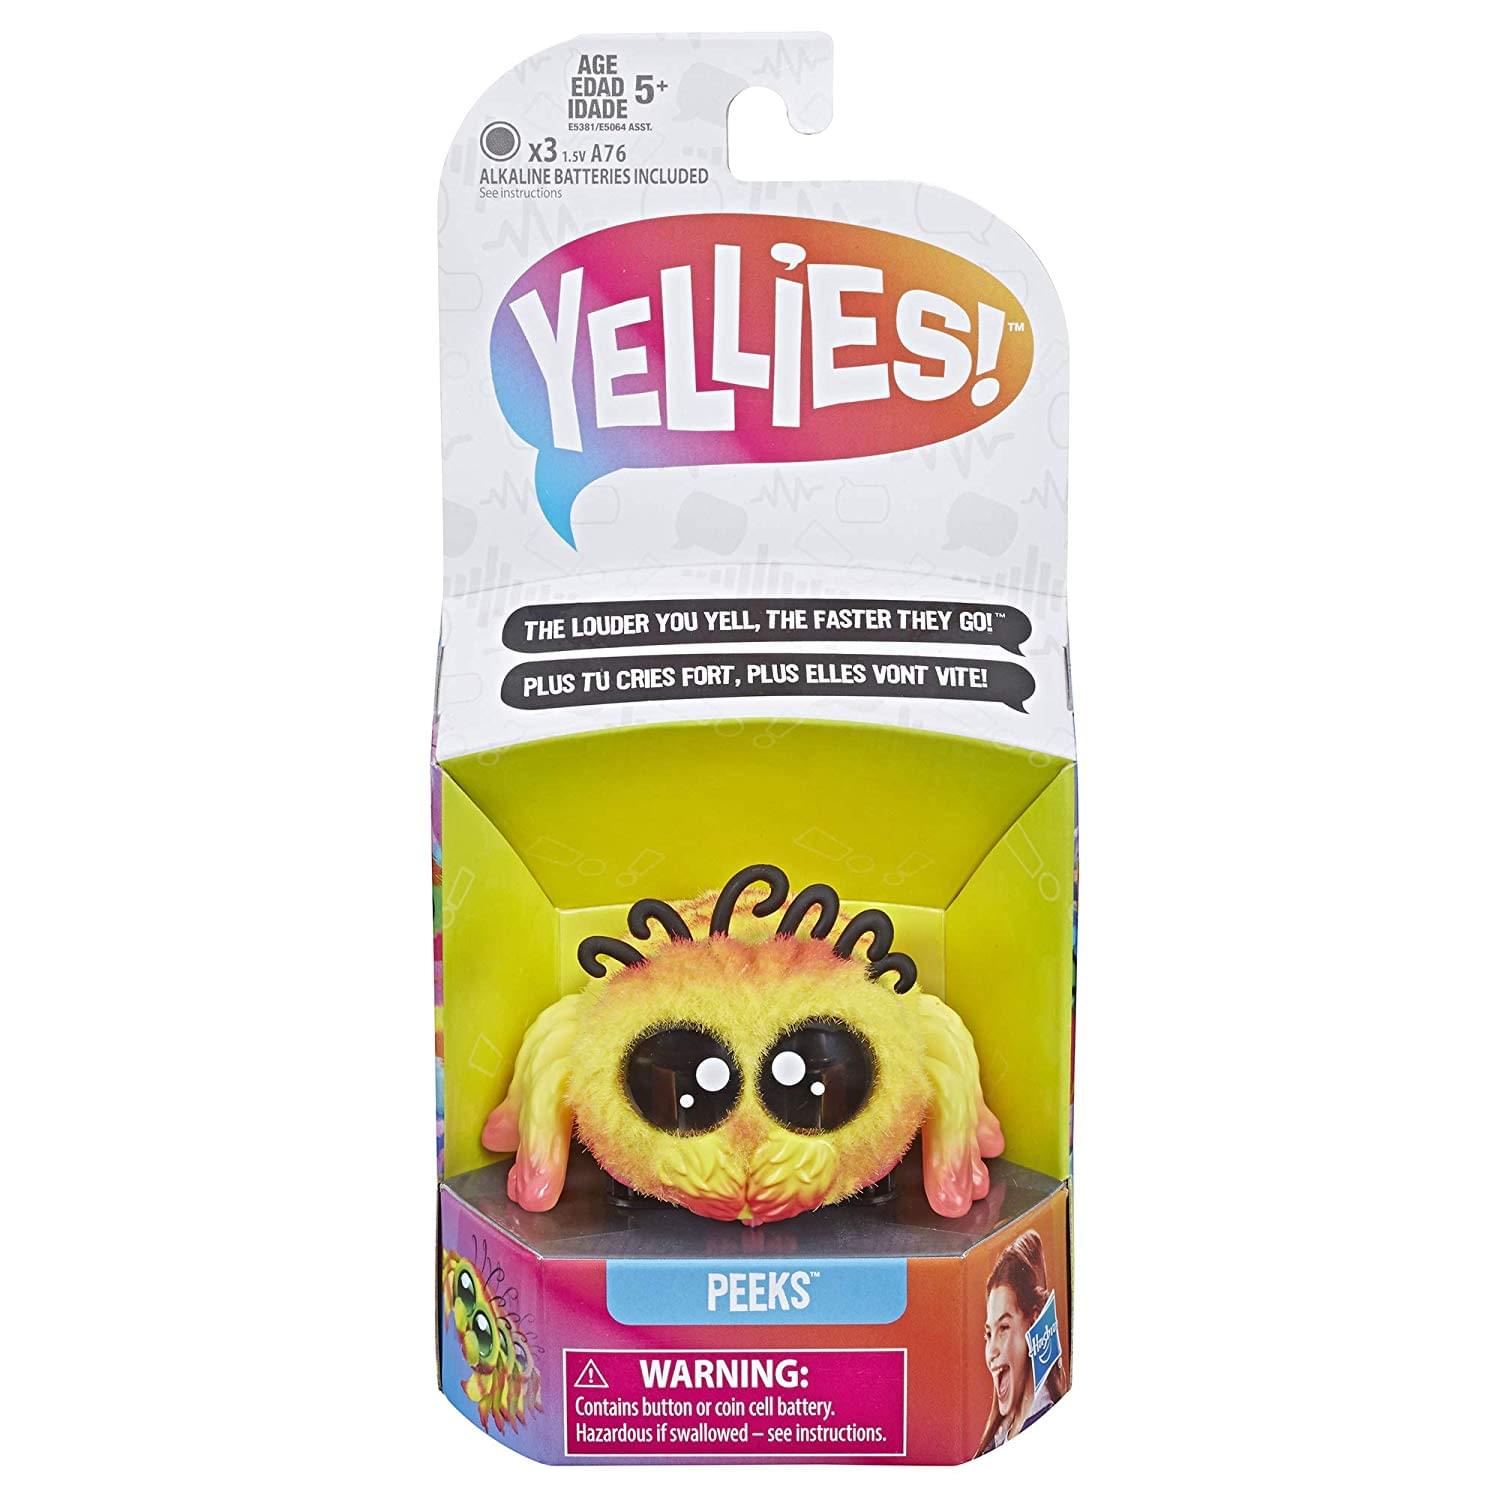 Yellies! Voice & Sound Activated Electronic Spider Pet - Peeks